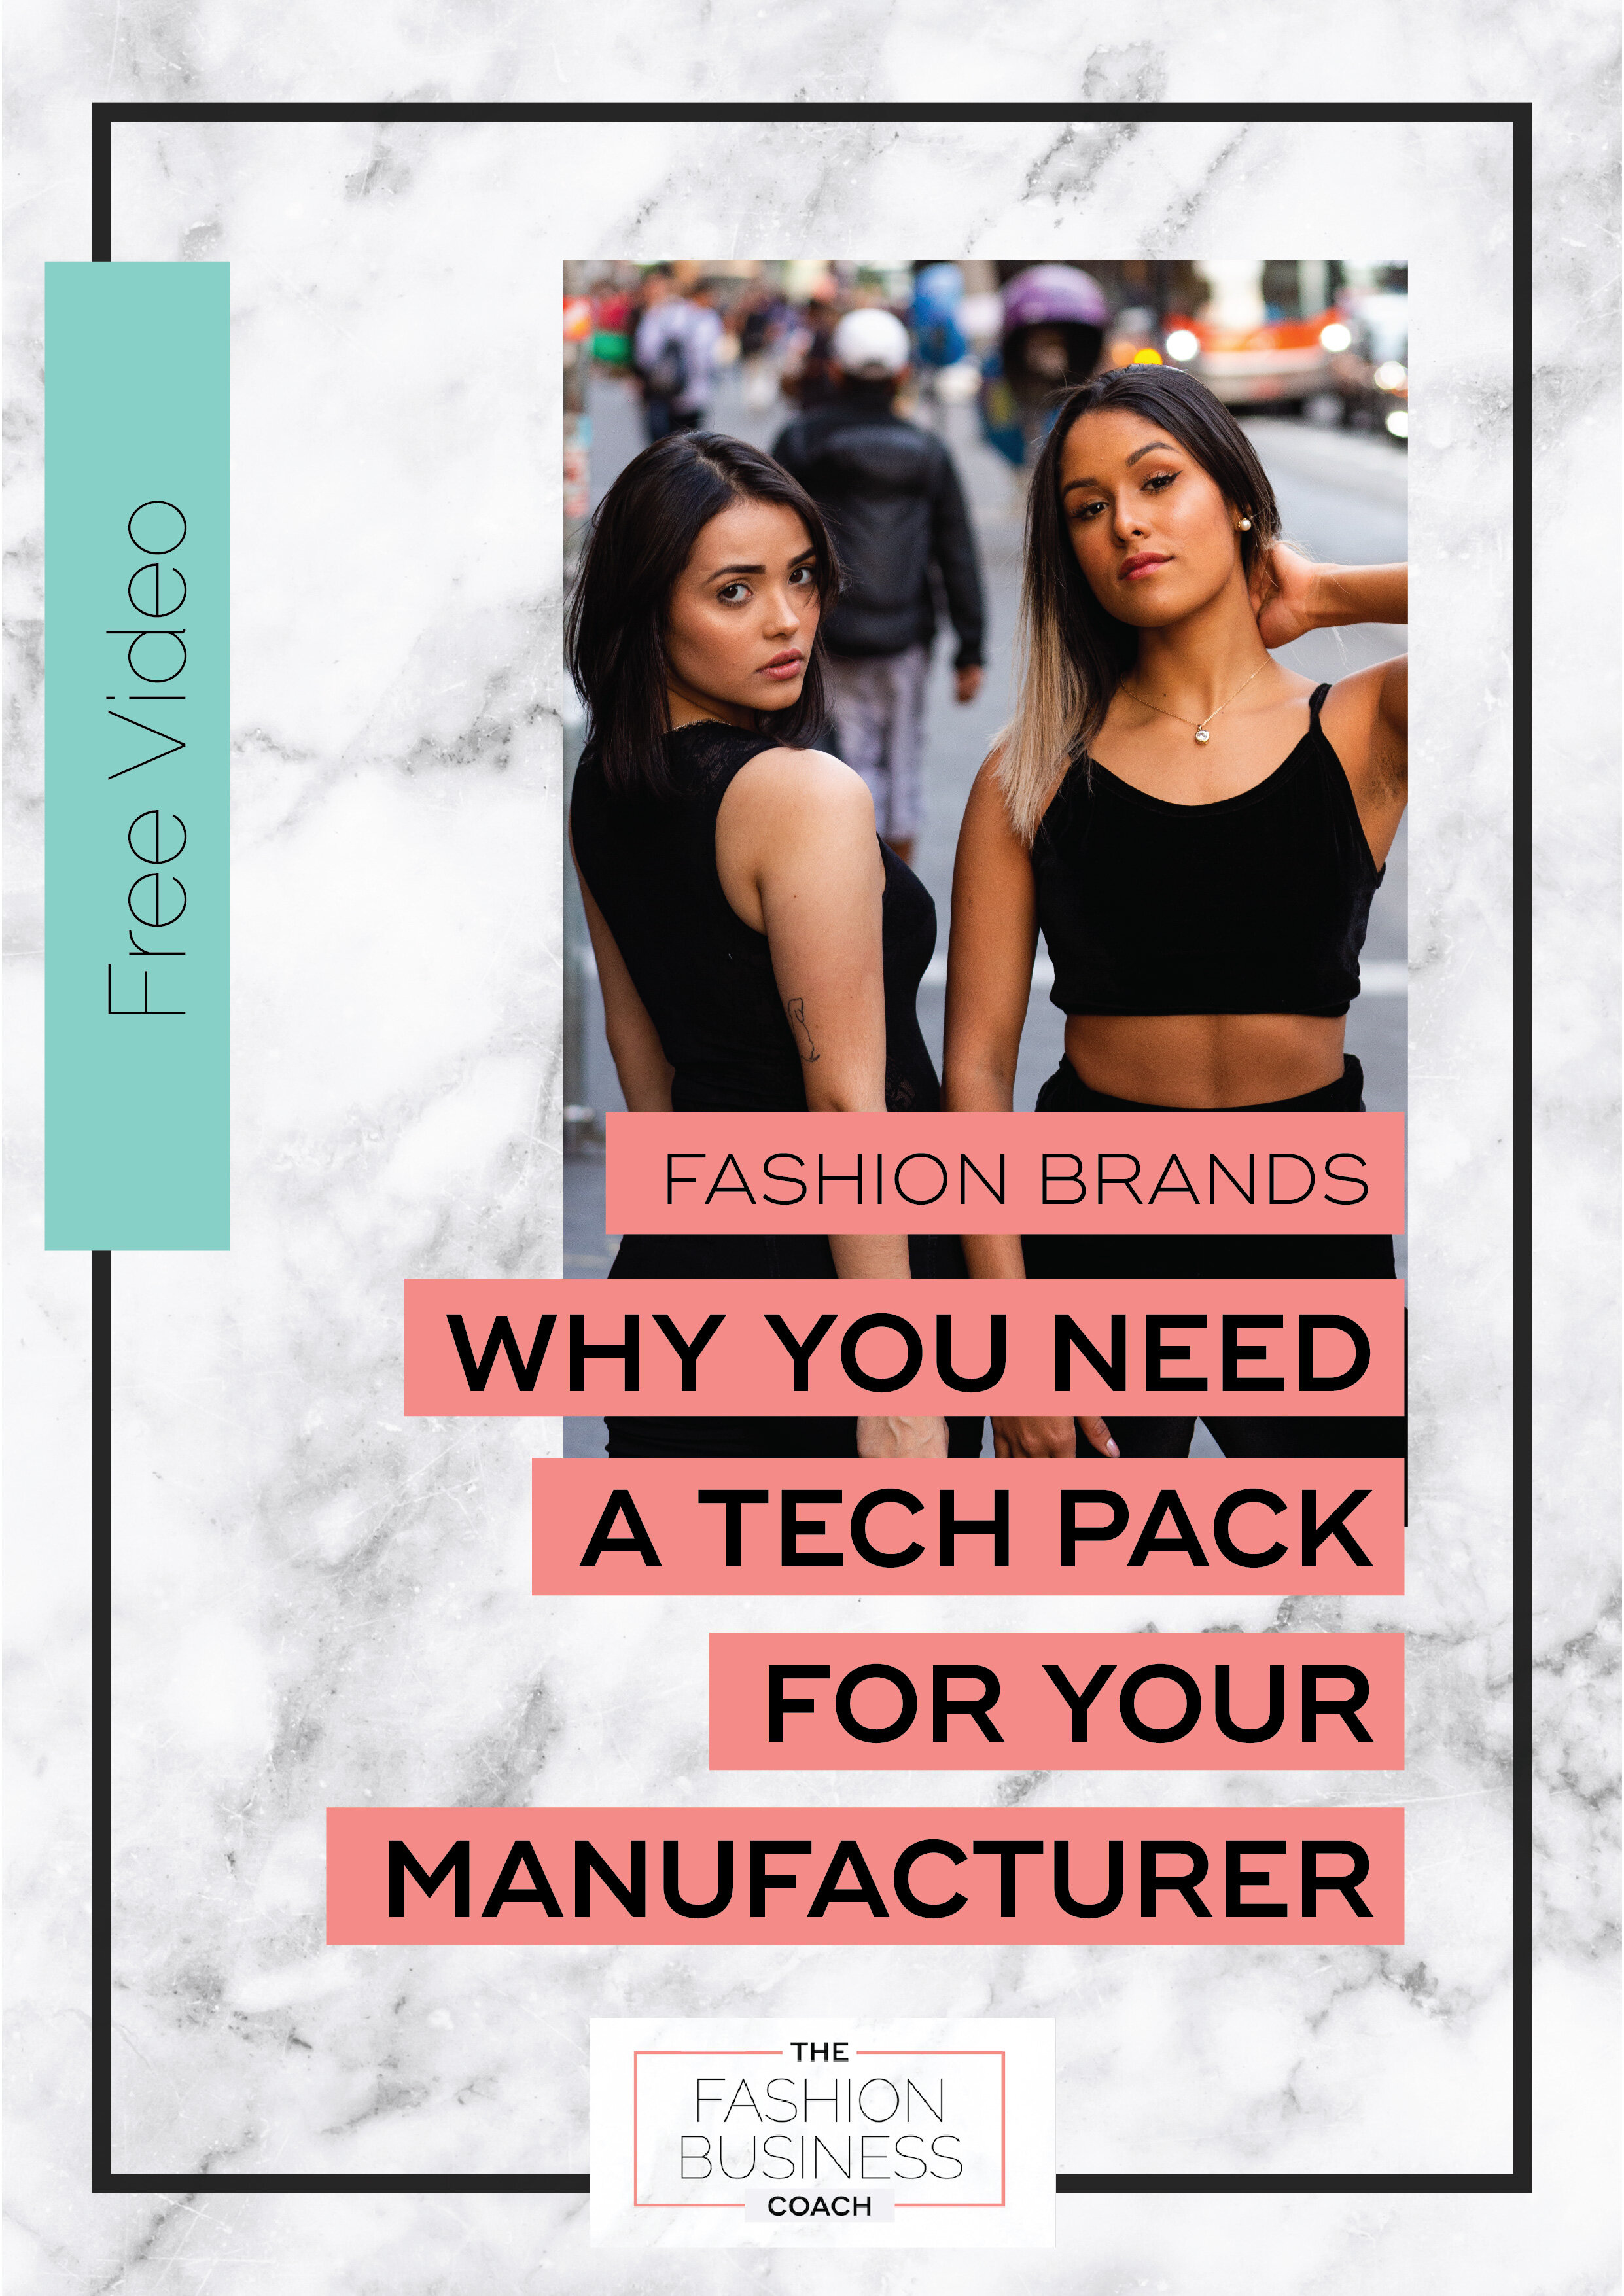 Fashion Brands Why You Need a Tech Pack for Your Manufacturer Video.jpg